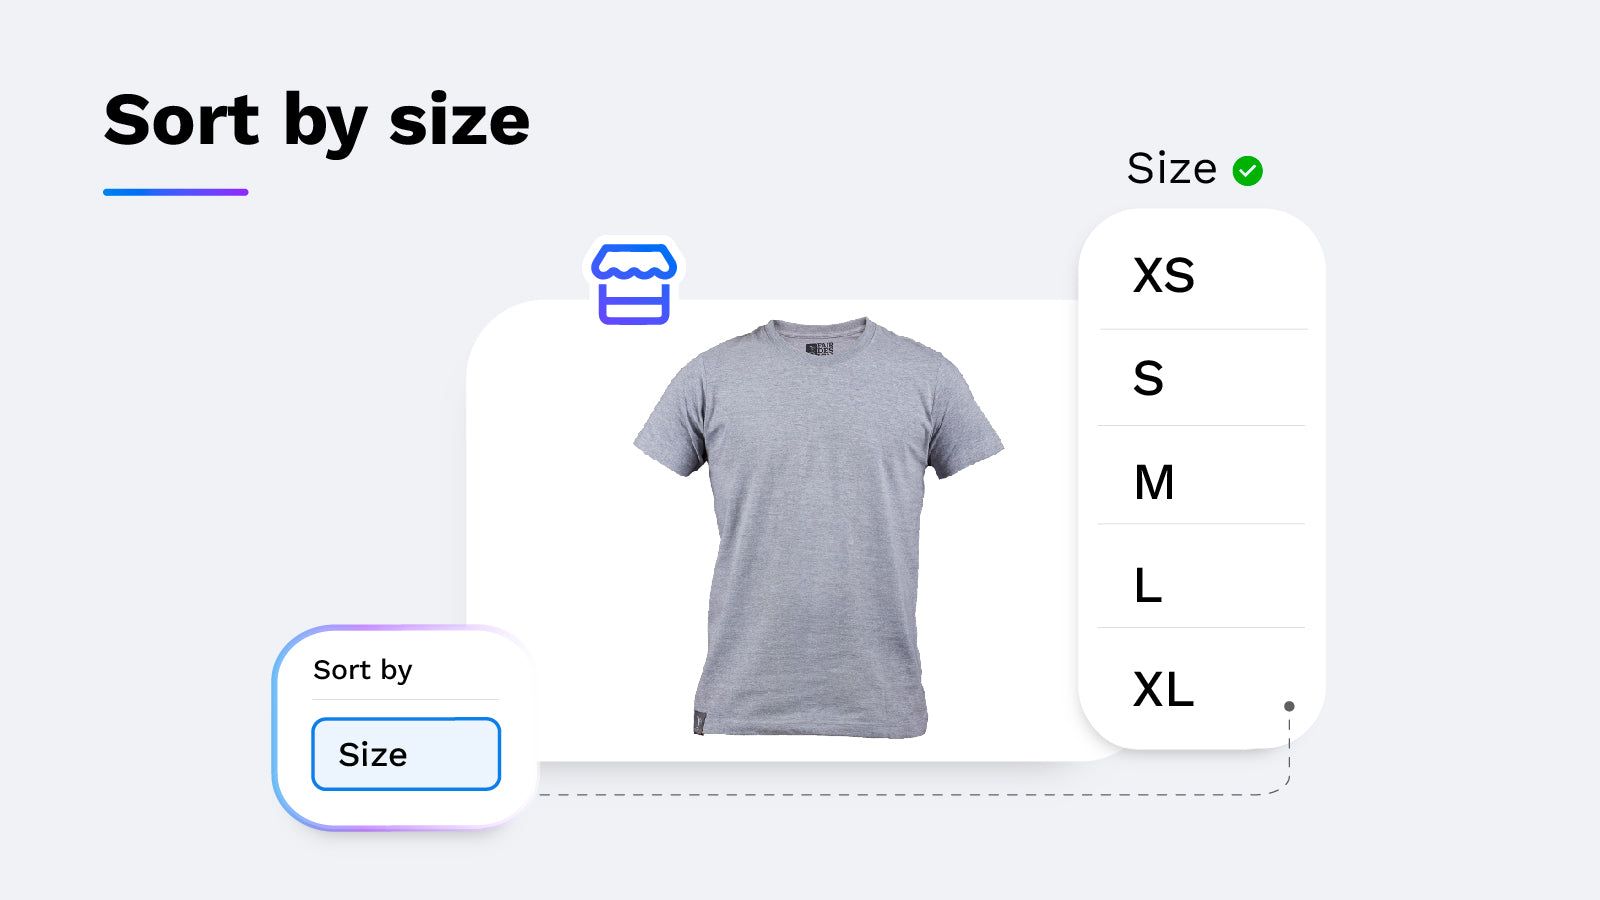 Sort by size